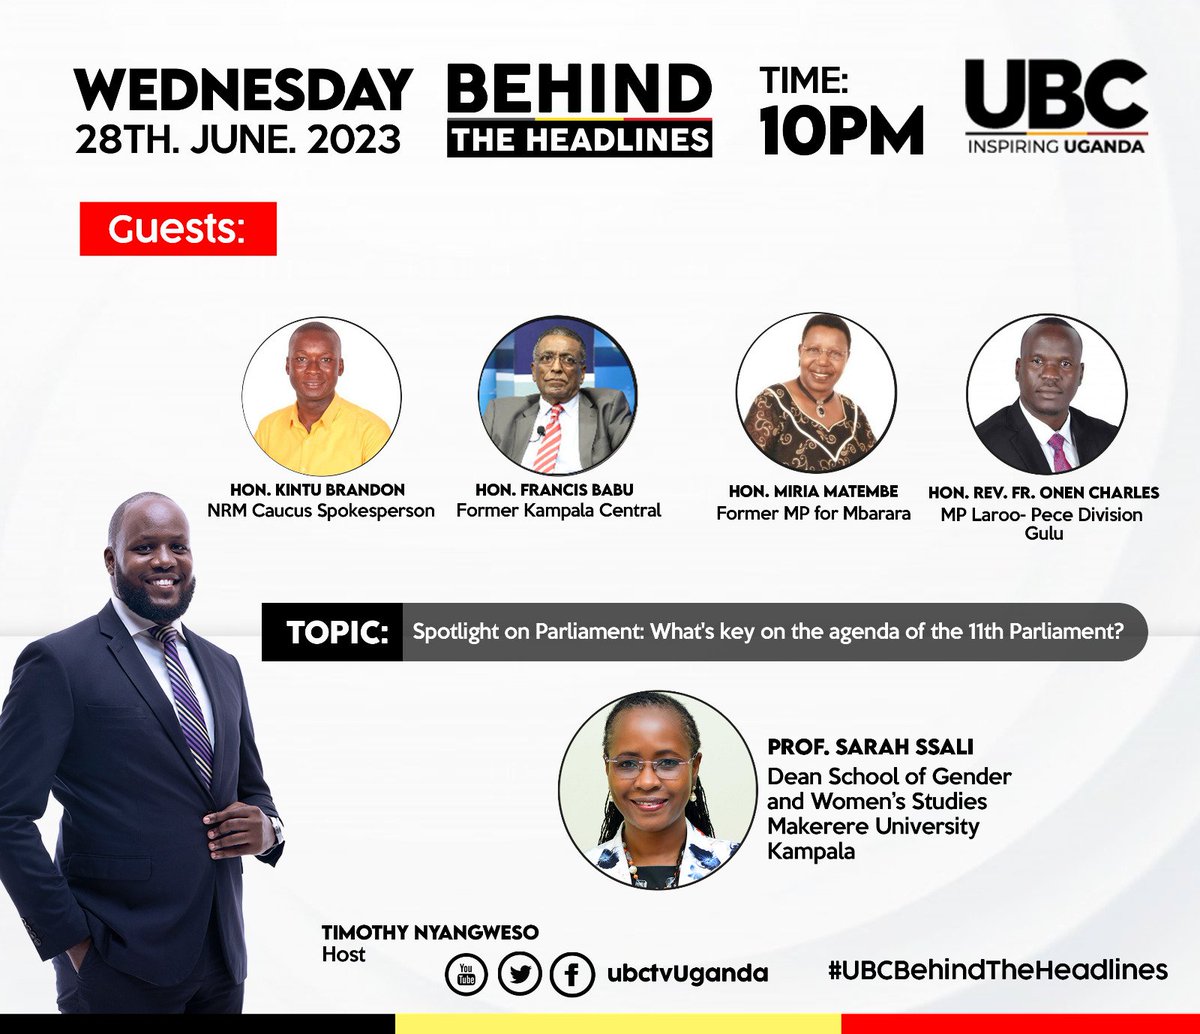 #BehindTheHeadlines @ubctvuganda will be airing  live @10pm